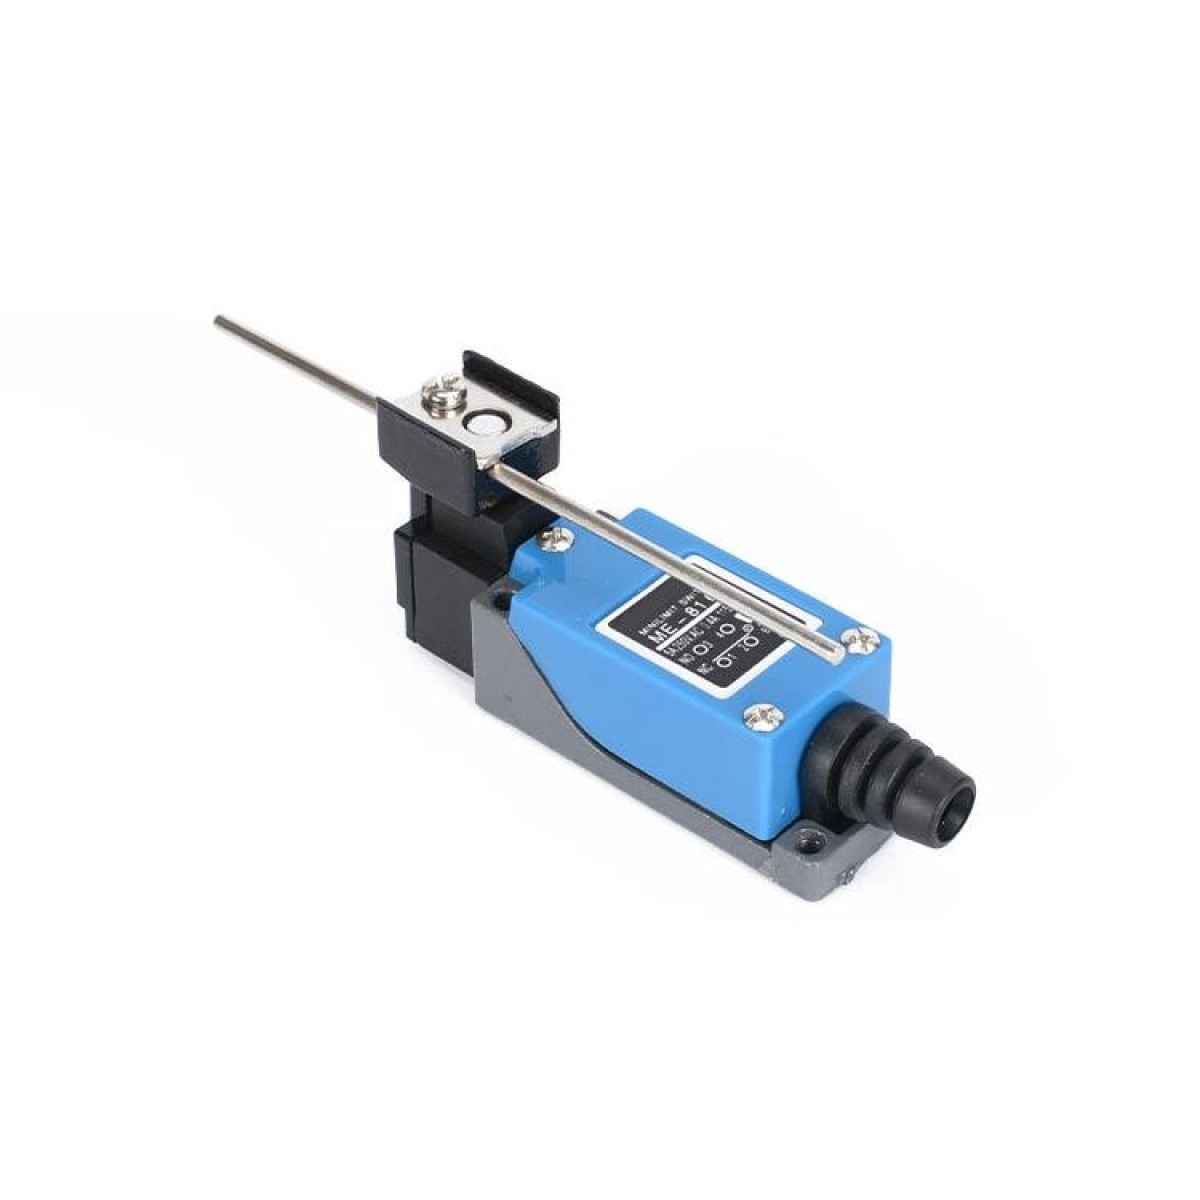 Electrical Rotary 90 Degree Lever Limit Switch ME-8107(Blue)